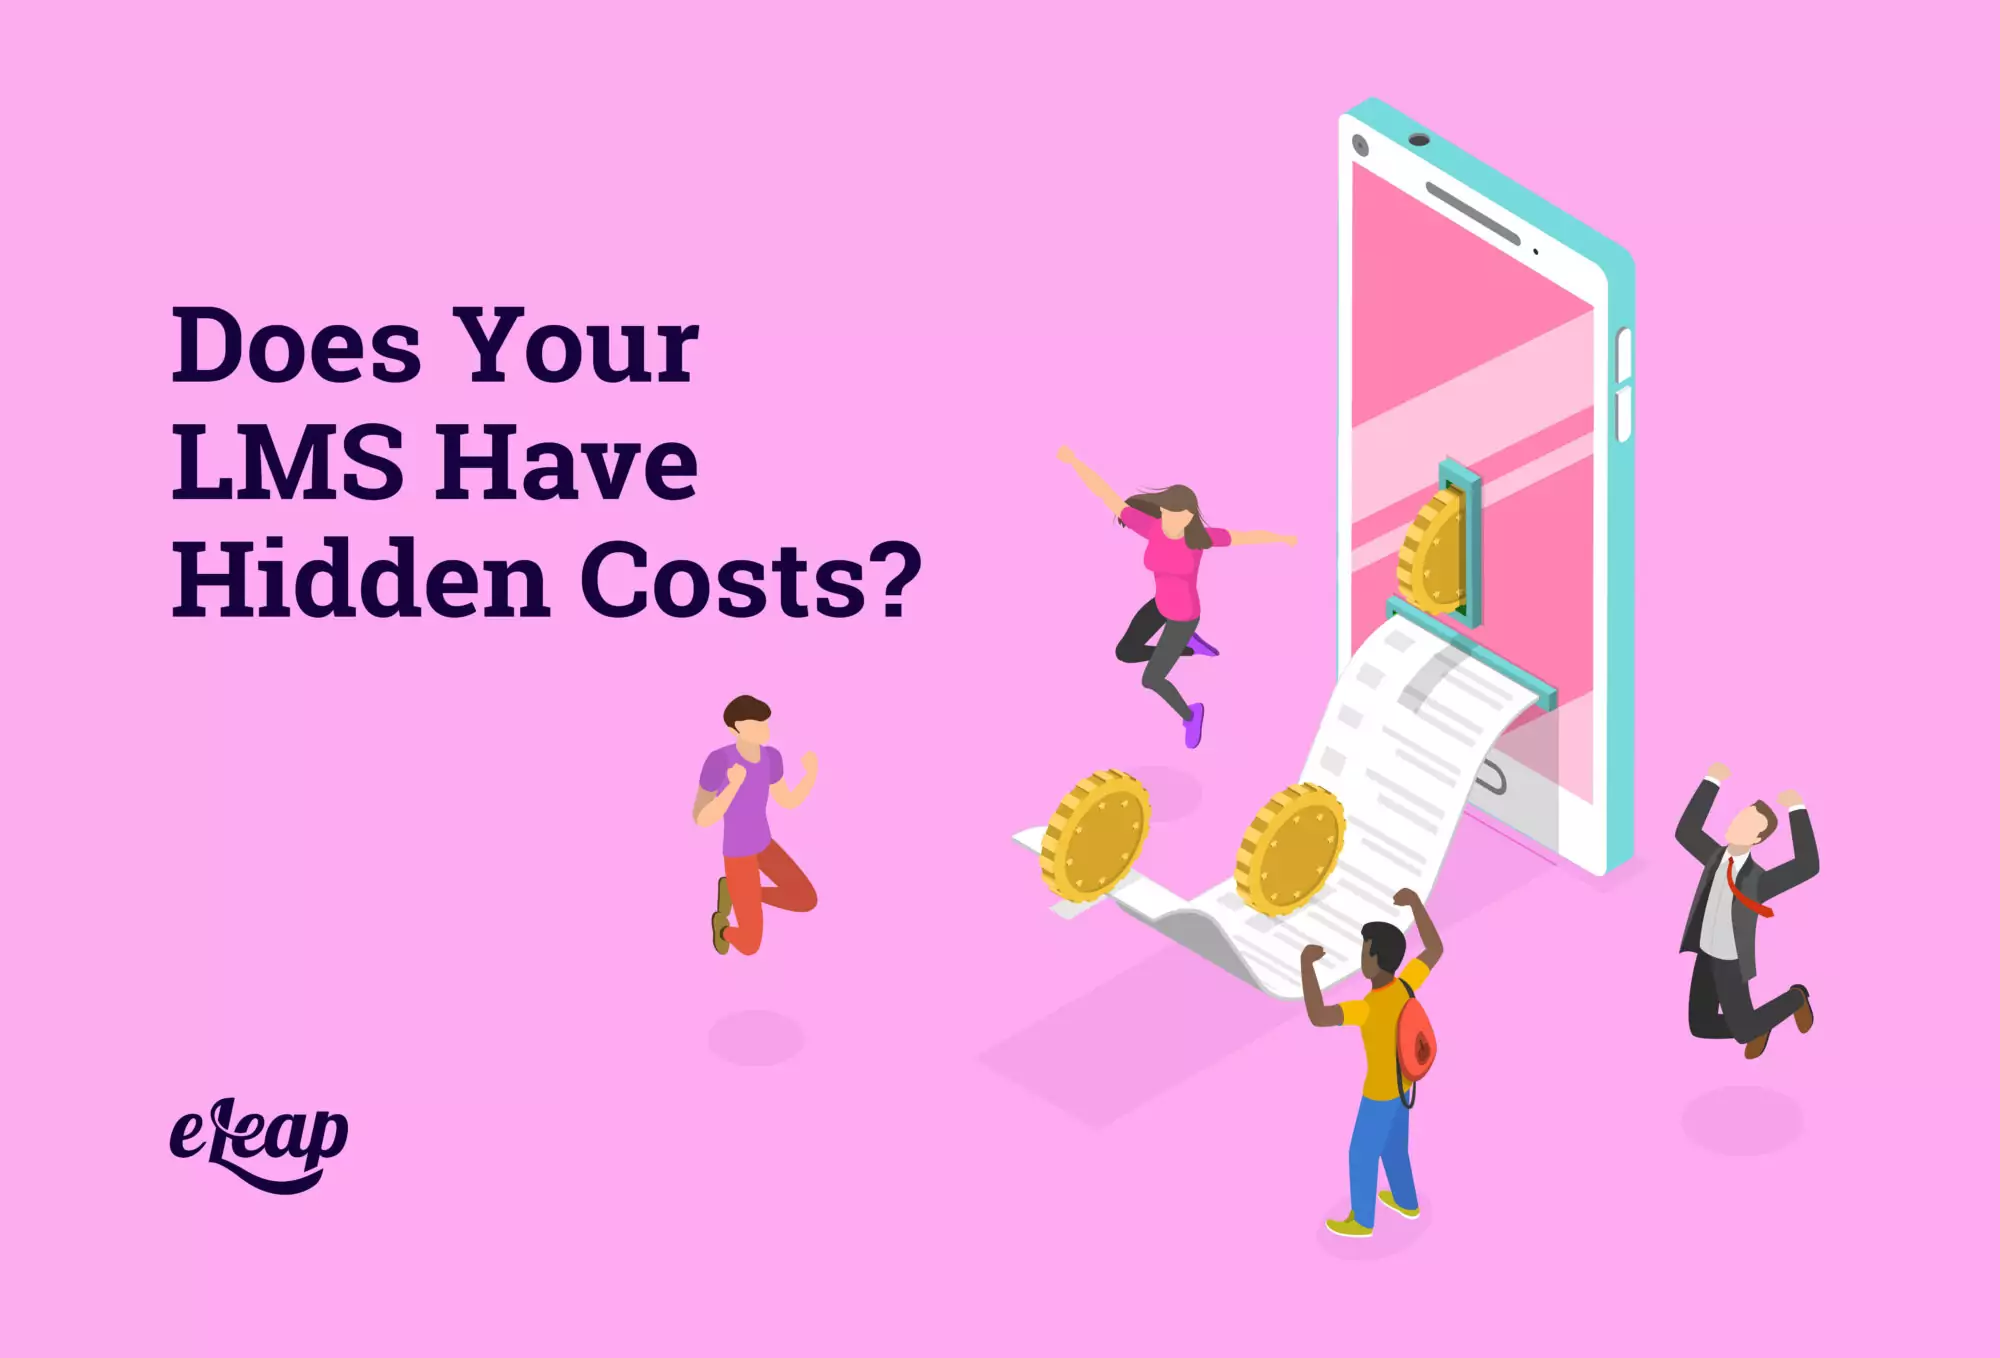 Does Your LMS Have Hidden Costs?